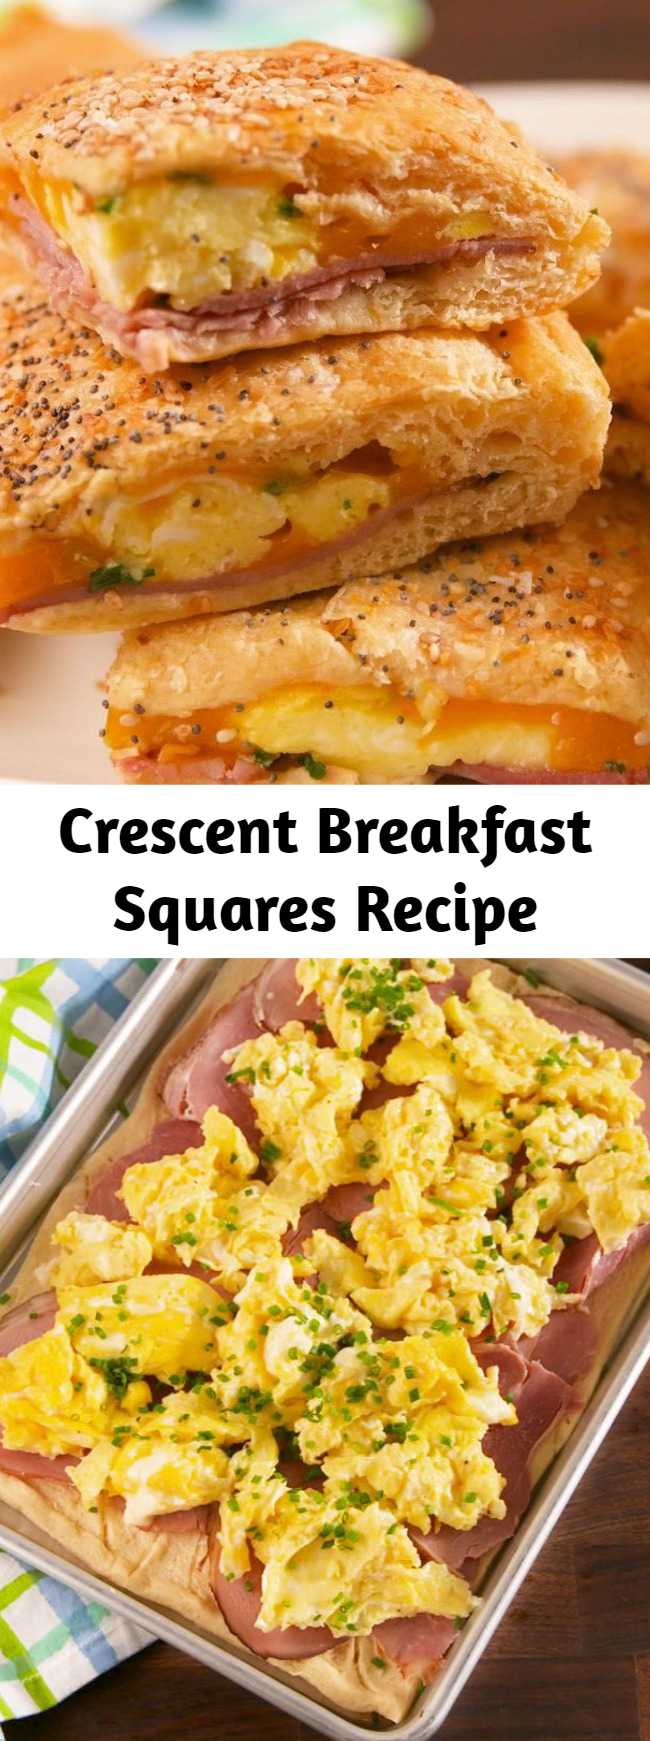 We love ourselves a good crescent dough hack, and this one is one of our faves. Look for dough you can buy as a full sheet (as opposed to the kind with perforated edges). It's not totally necessary, but it'll make things easier to assemble. #easy #recipe #eggs #cheese #crescentdough #dough #breakfast #brunch #ham #sheetpan #squares